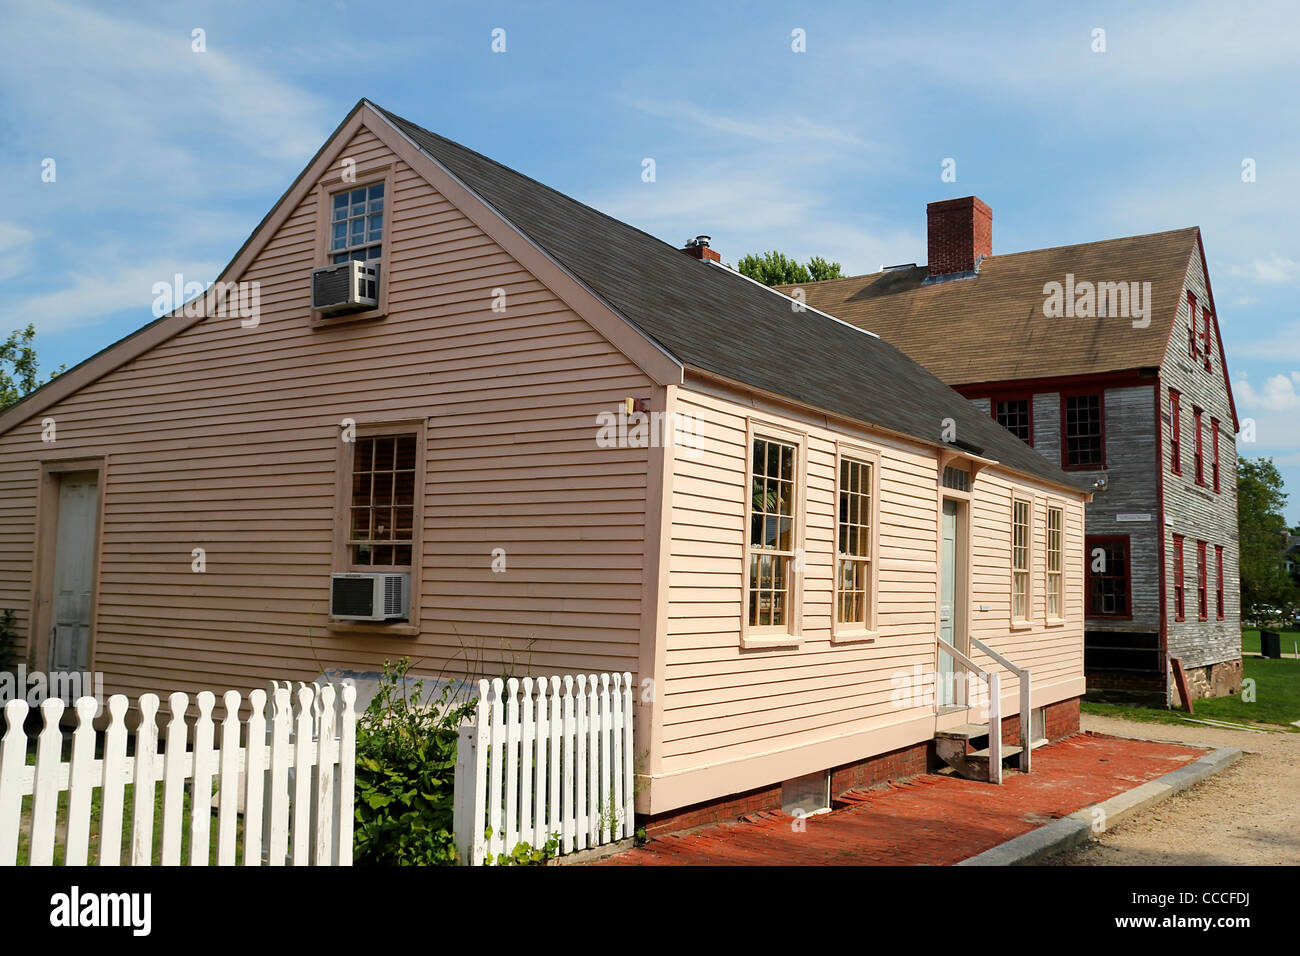 Houses in Strawberry Banke, Portsmouth, New Hampshire Stock Photo